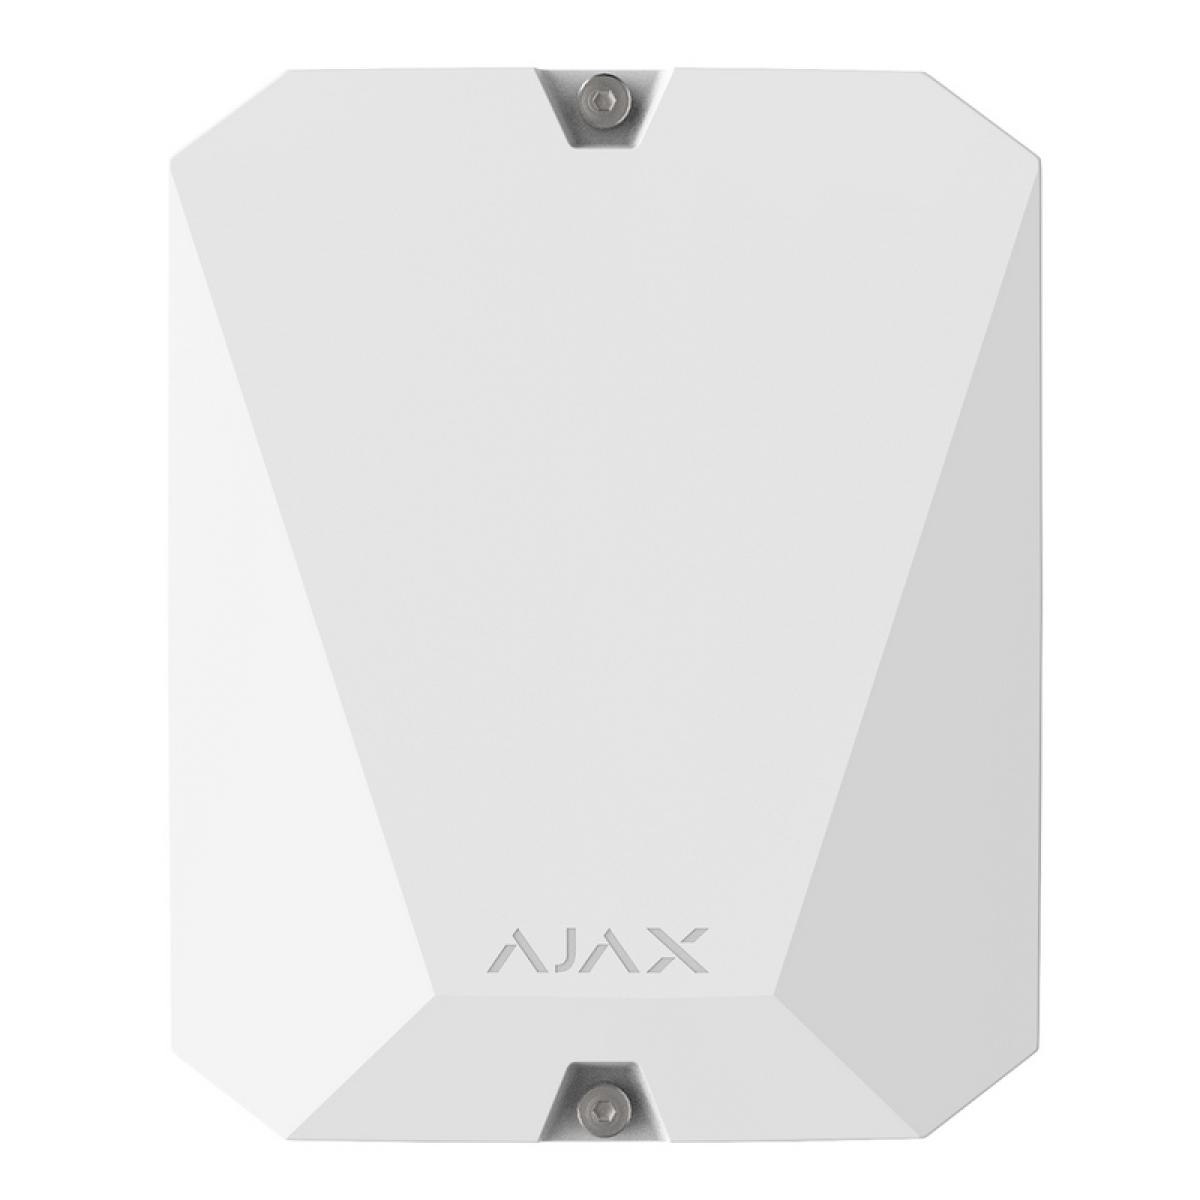 Ajax Multi Transmitter Module for connecting wired alarm to Ajax and managing security via the app